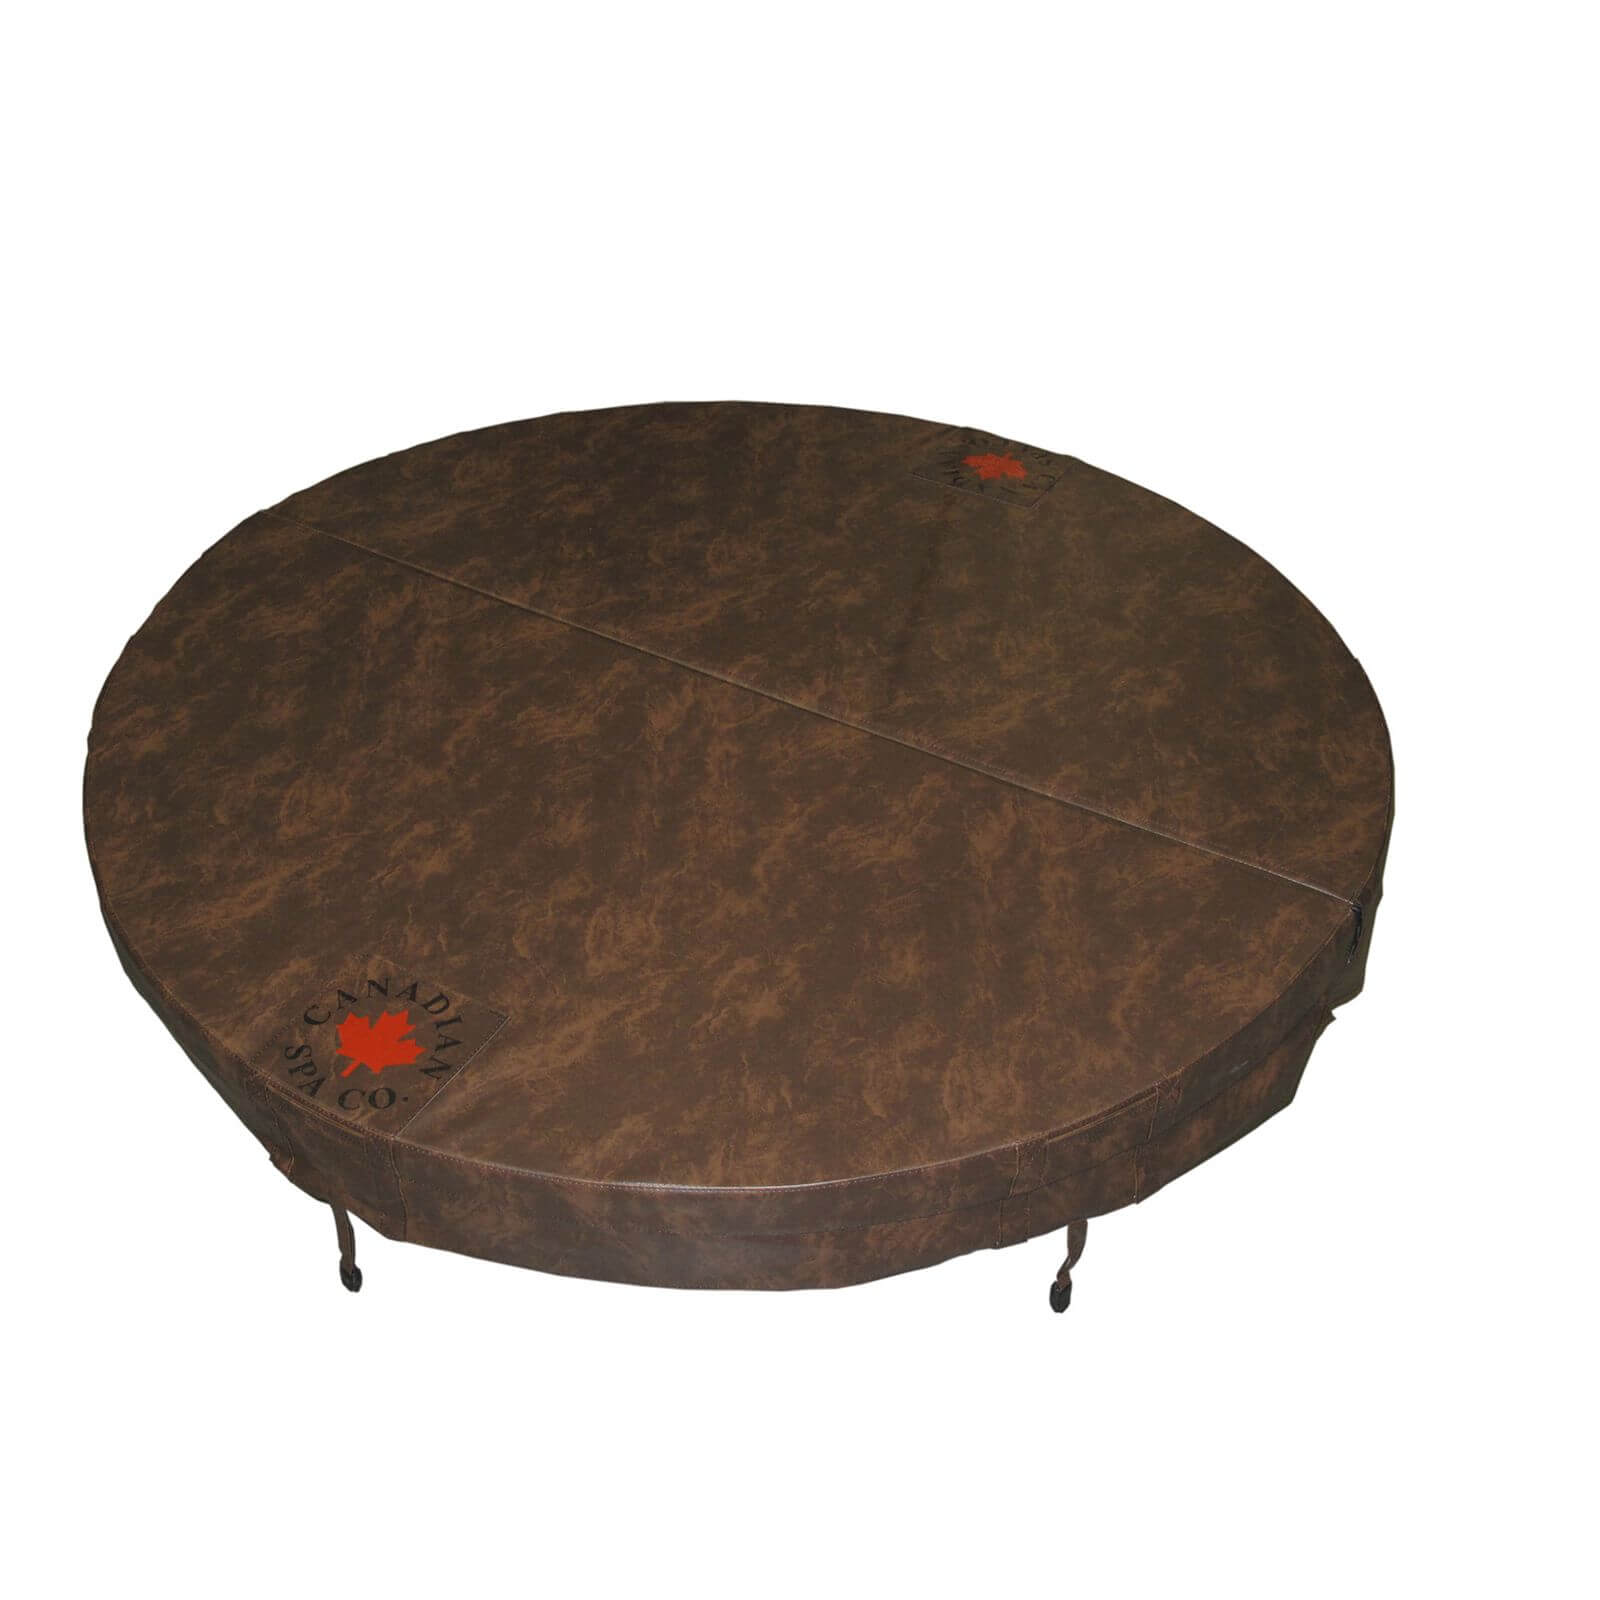 Canadian Spa Round Hot Tub Cover - Brown / 203cm Diameter